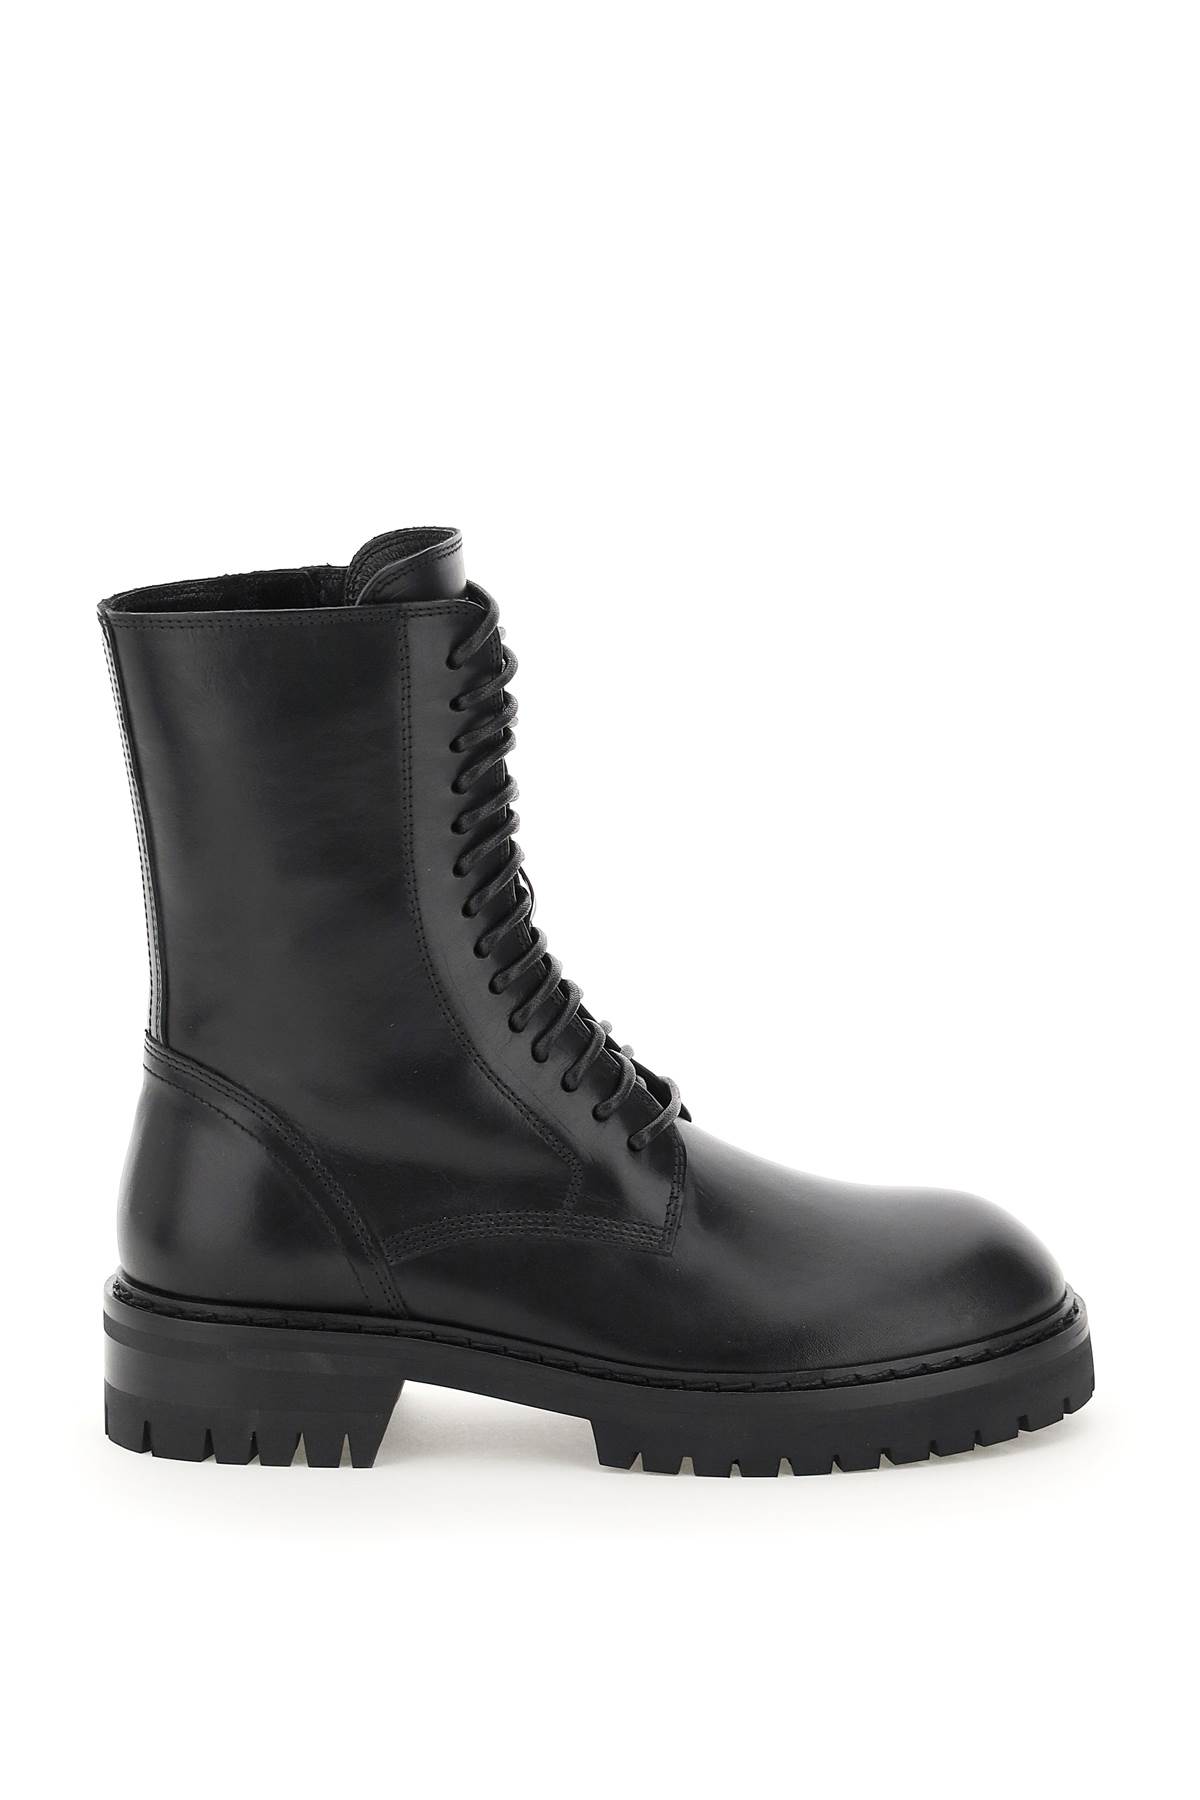 Ann Demeulemeester Alec Leather Combat Boots